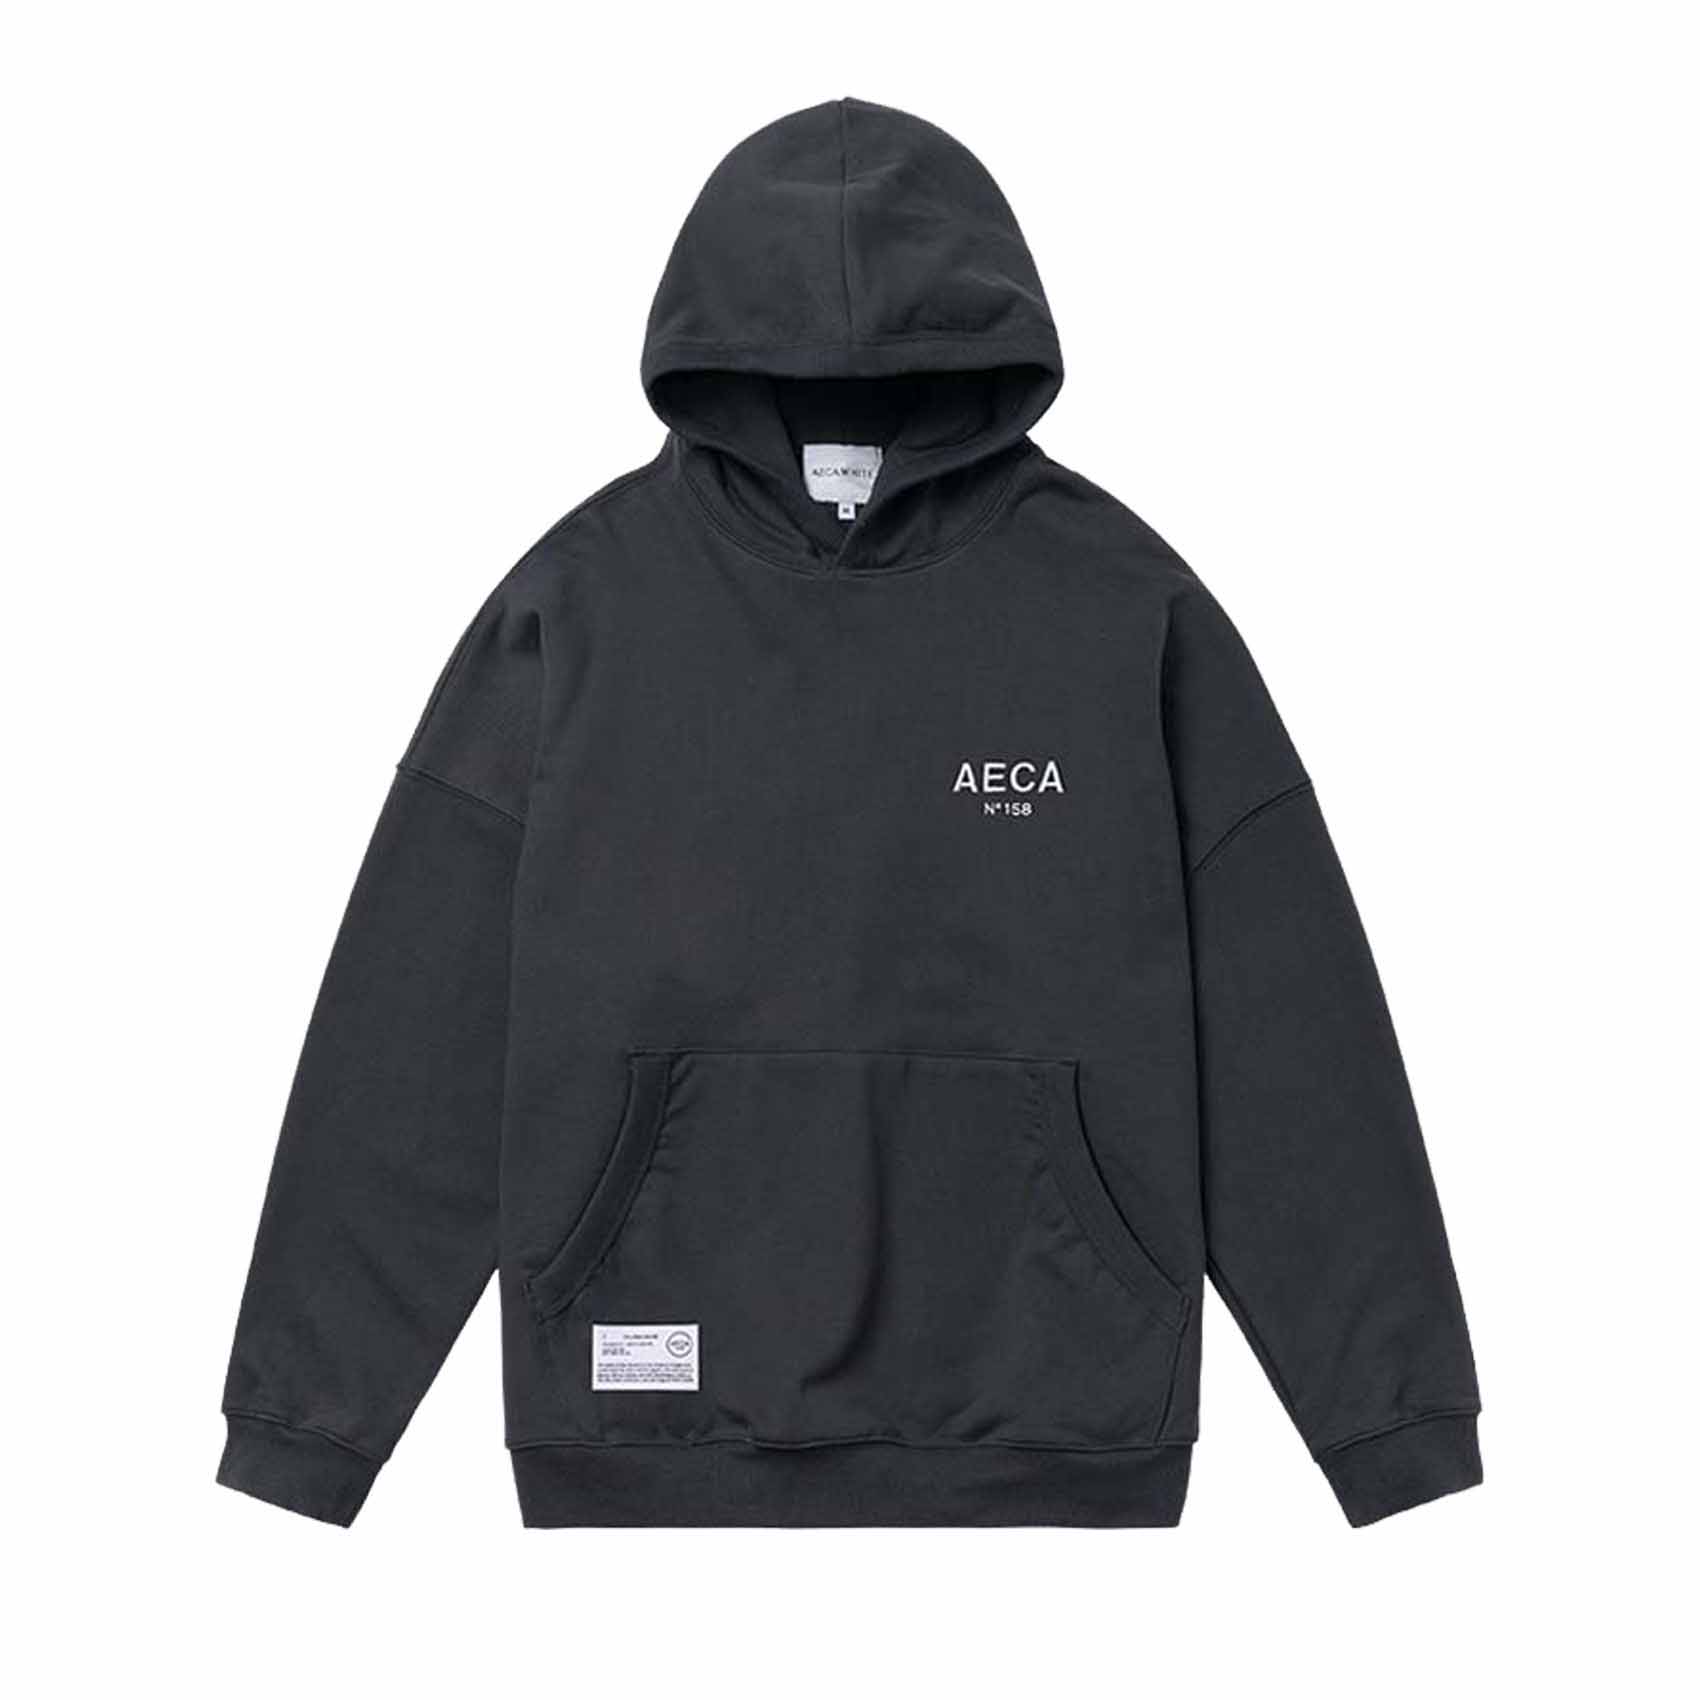 AECA OVERSIZE PULLOVER HOODIE - CHARCOAL